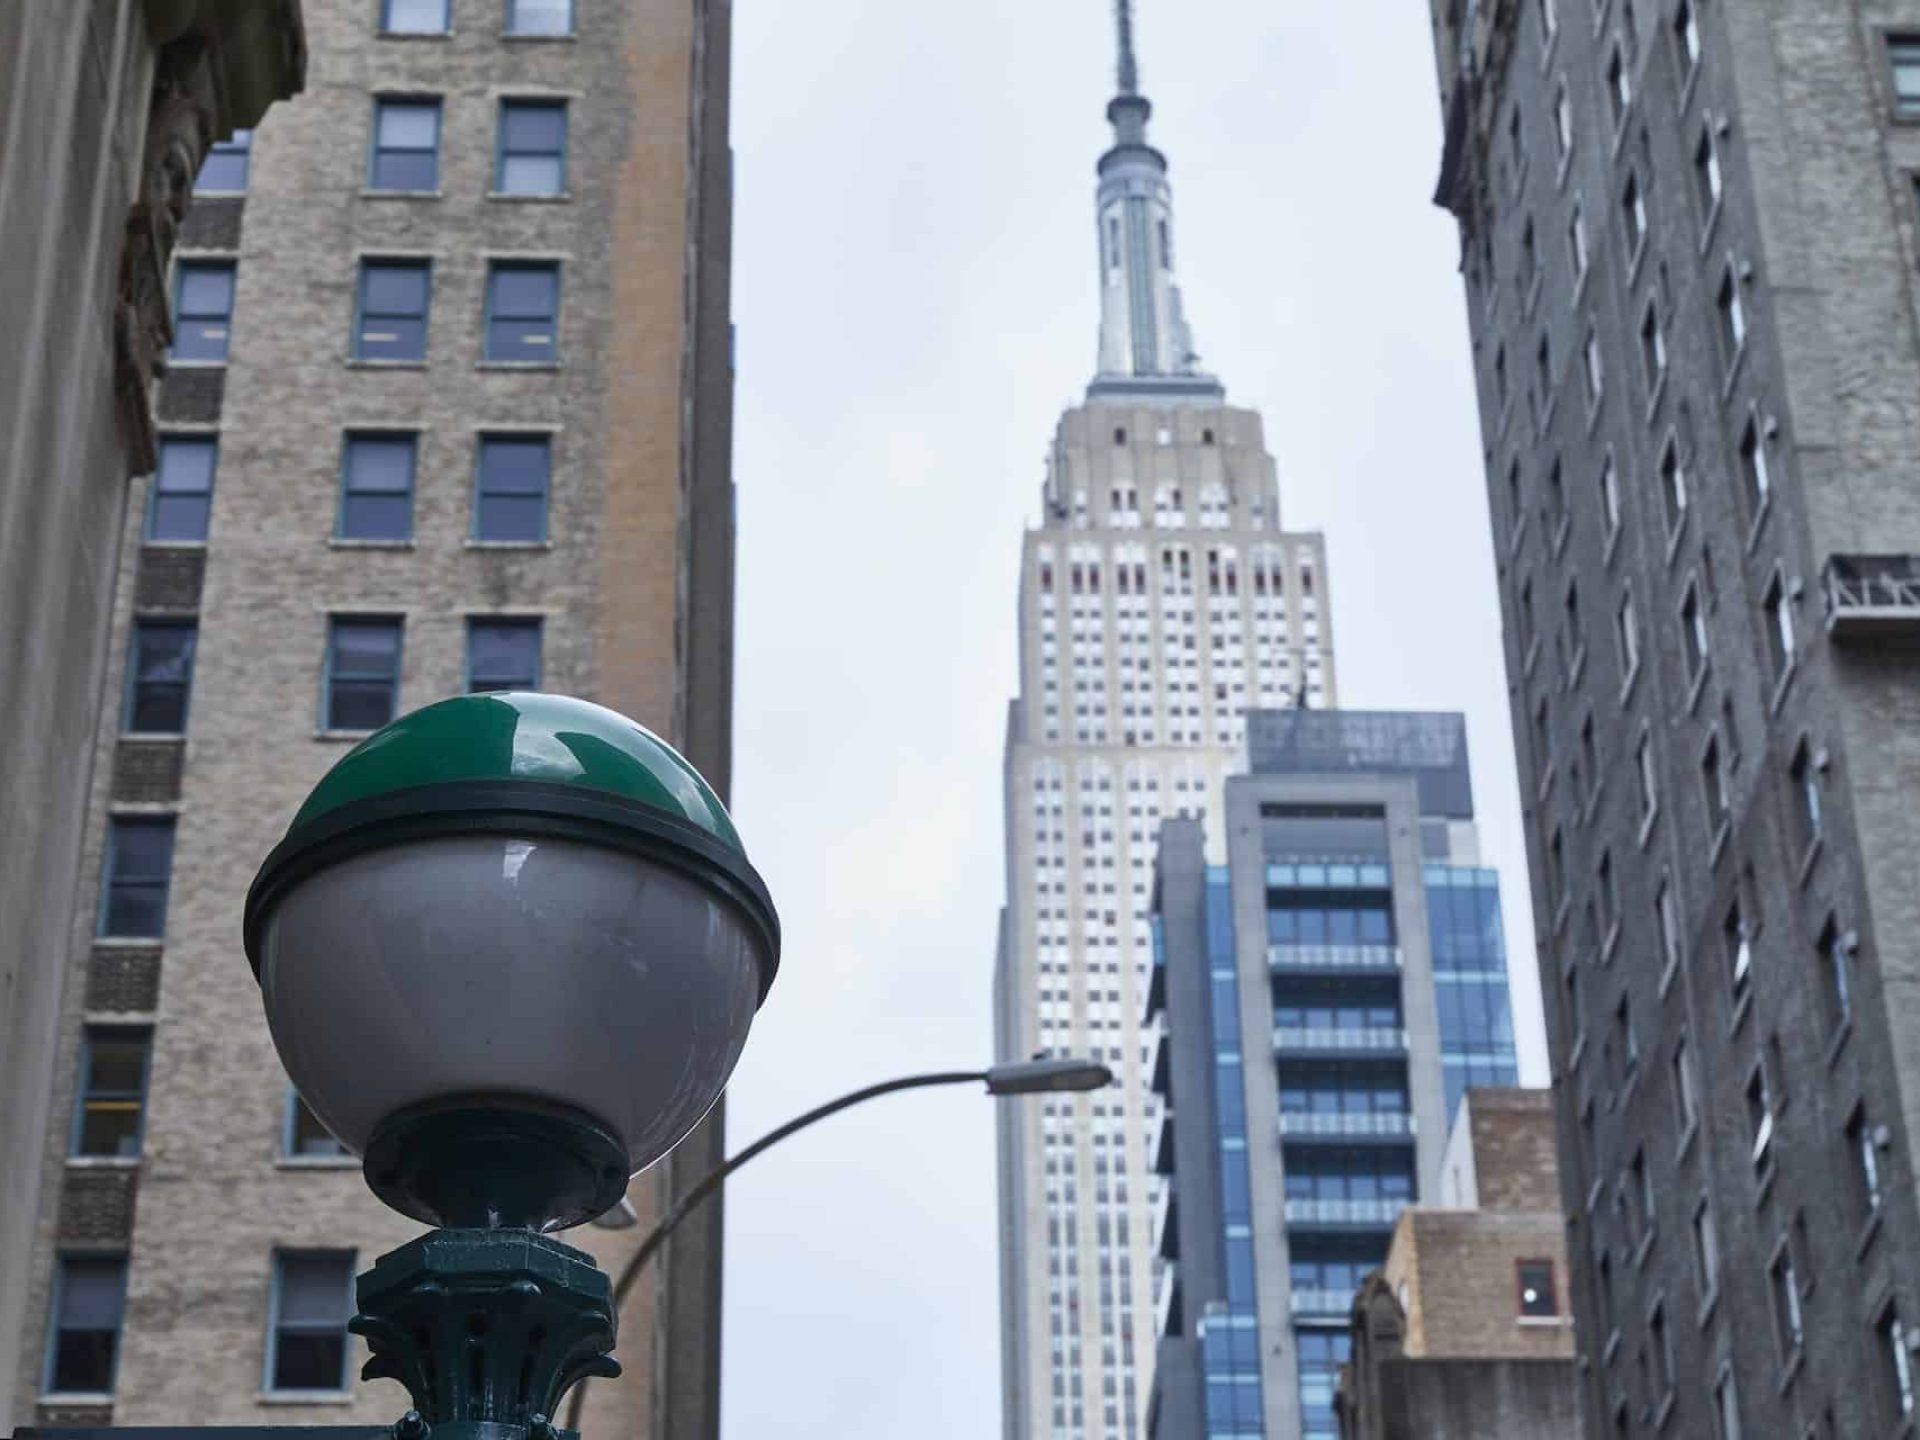 Street view looking up at the Empire State Building in New York City with a street lamp in the foreground.